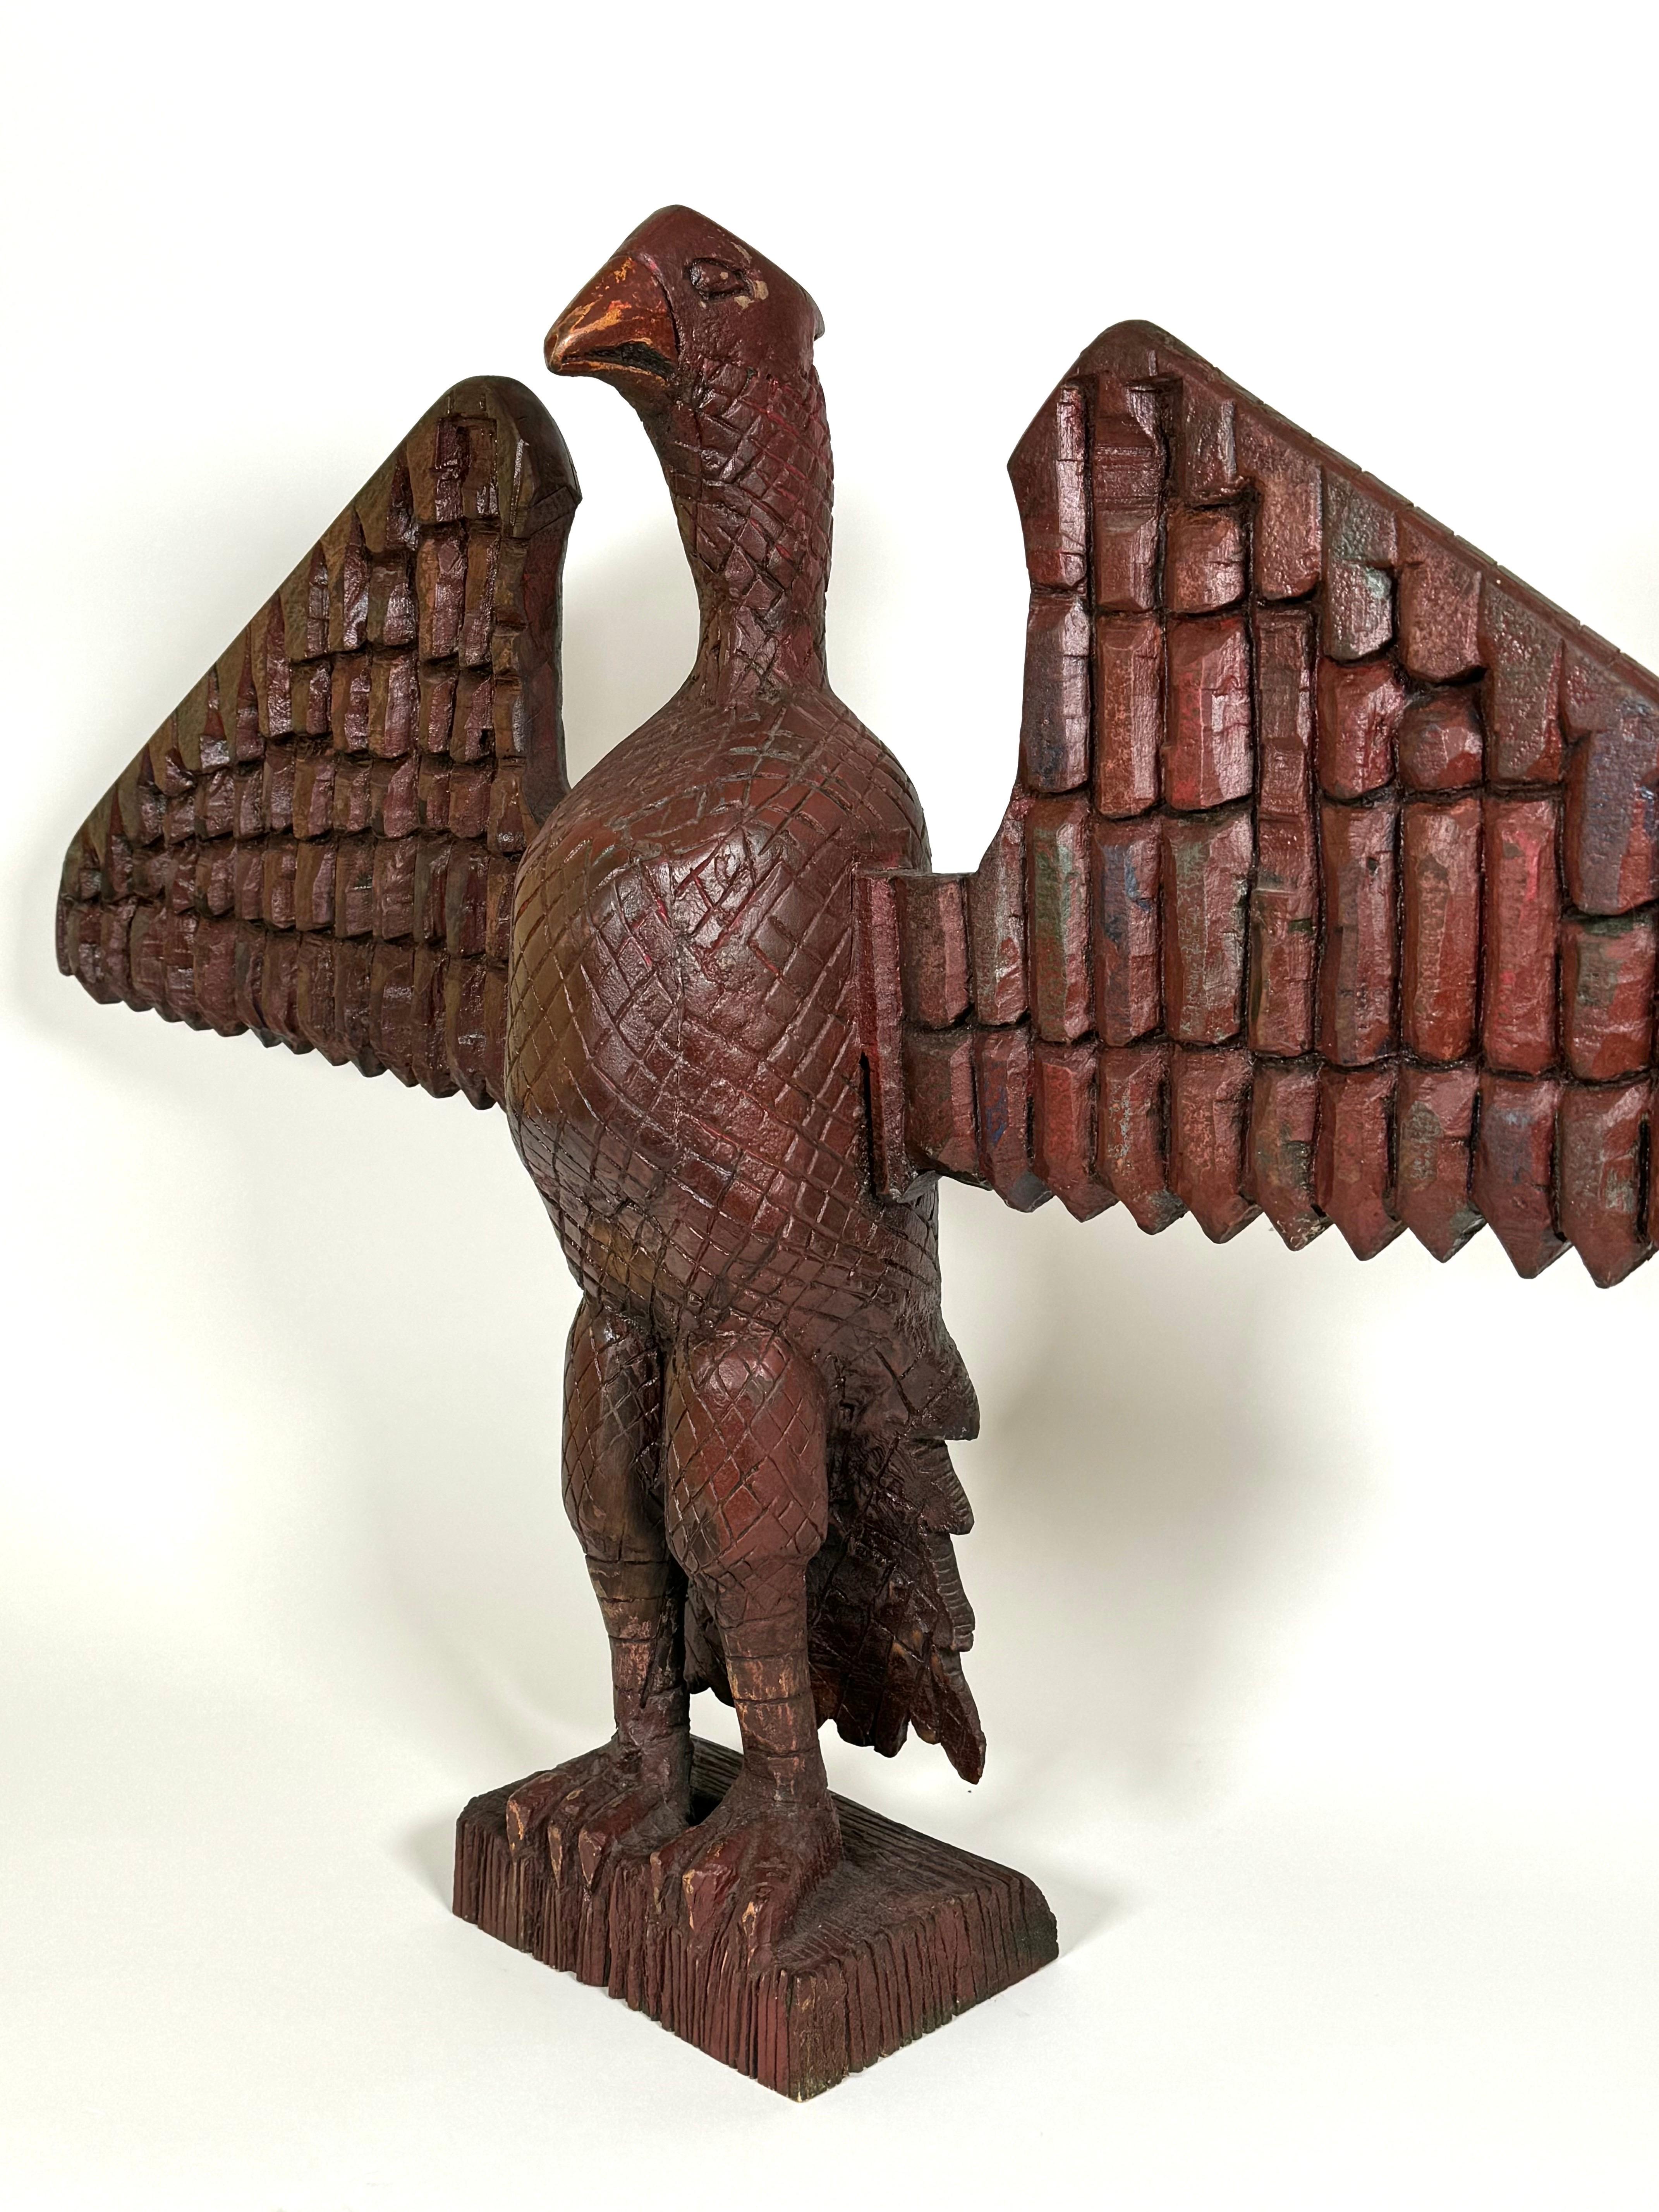 Early 20th Century hand carved wooden eagle with a red wash finish.  The eagle has out stretched wings and a up right posture resting on a rectangular wooden base. Extensive carving details on the entire sculpture reminiscent of the work of American